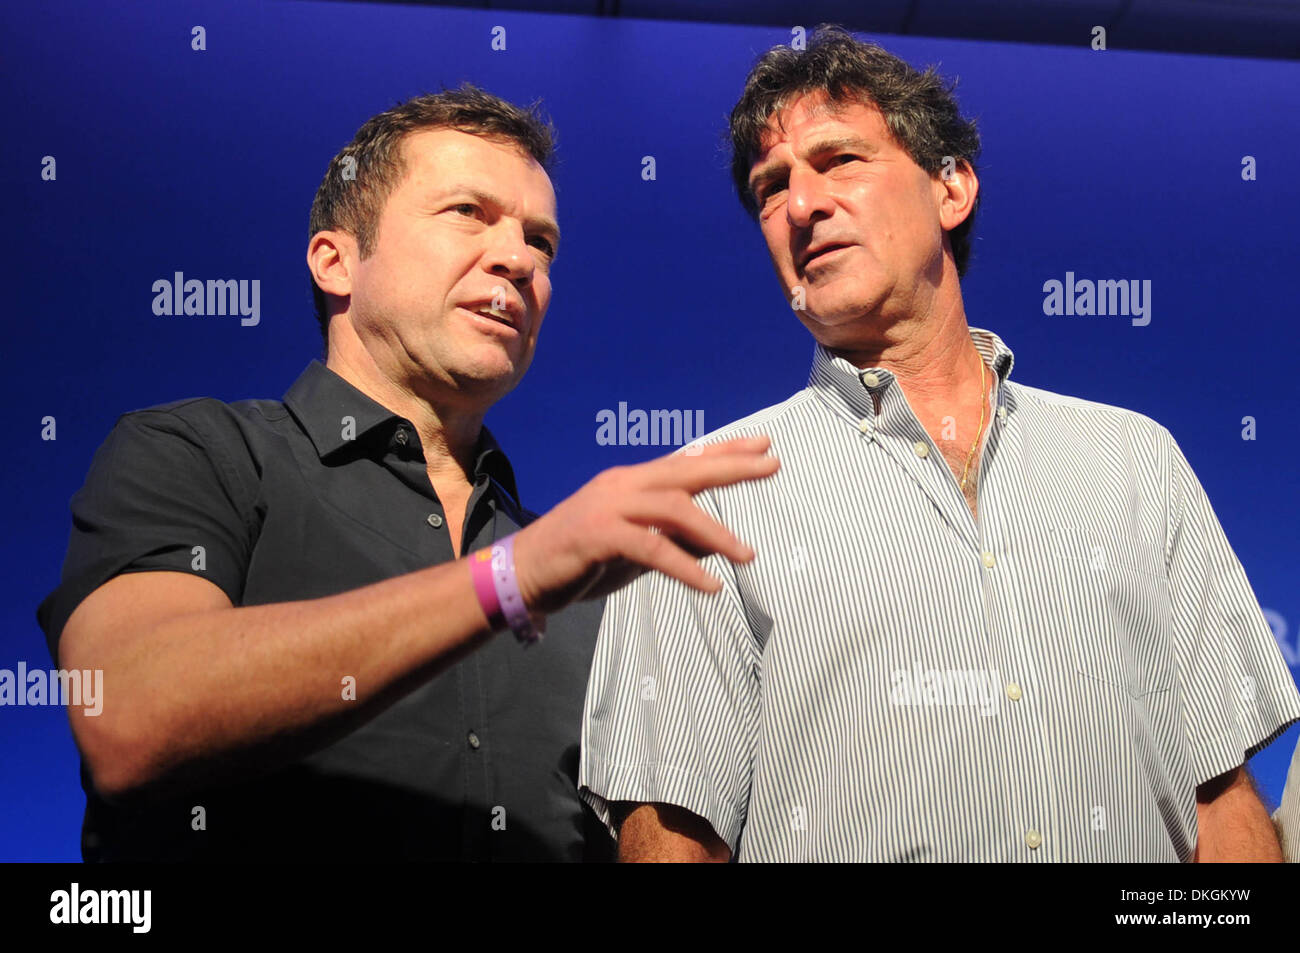 Costa Do Sauipe, Brazil. 5th December 2013.  Former soccer players Lothar Matthaus (L) and Mario Kempes take part in a press conference on the eve of the draw for the World Cup Brazil 2014 in Costa do Sauipe, Brazil, on Dec. 5, 2013. The draw for the groups and matchups of the World Cup Brazil 2014 will take place on Friday. (Xinhua/Juan Roleri/TELAM/Alamy Live News) Stock Photo